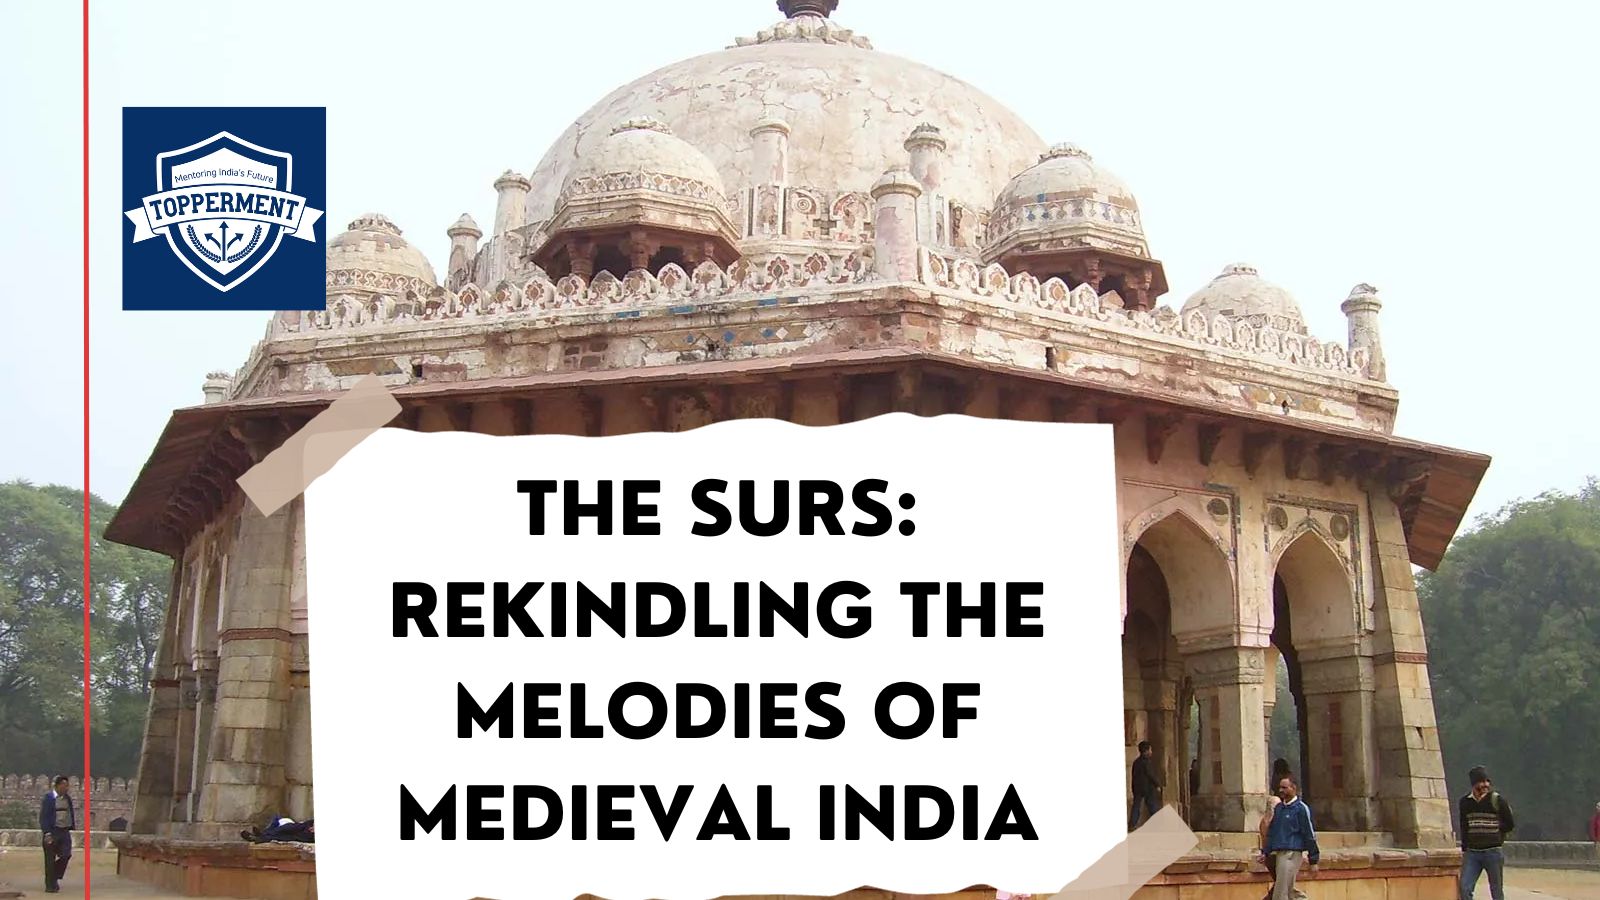 The-Surs-Rekindling-the-Melodies-of-Medieval-India-Best-UPSC-IAS-Coaching-For-Mentorship-And-Guidance